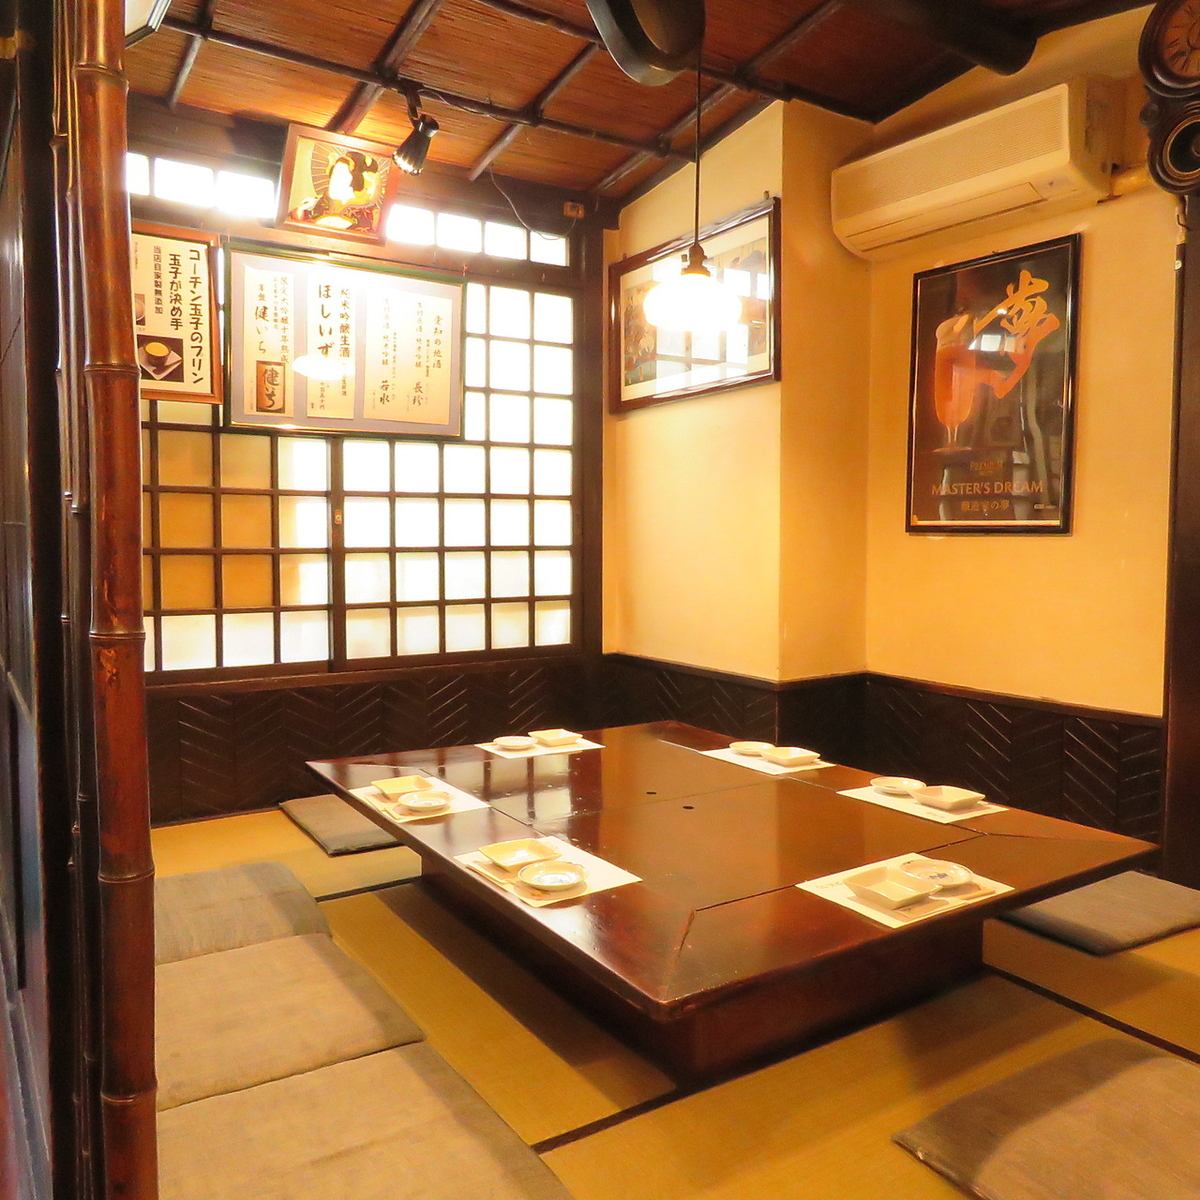 There are private rooms for 10 people! Spacious and small groups are welcome!